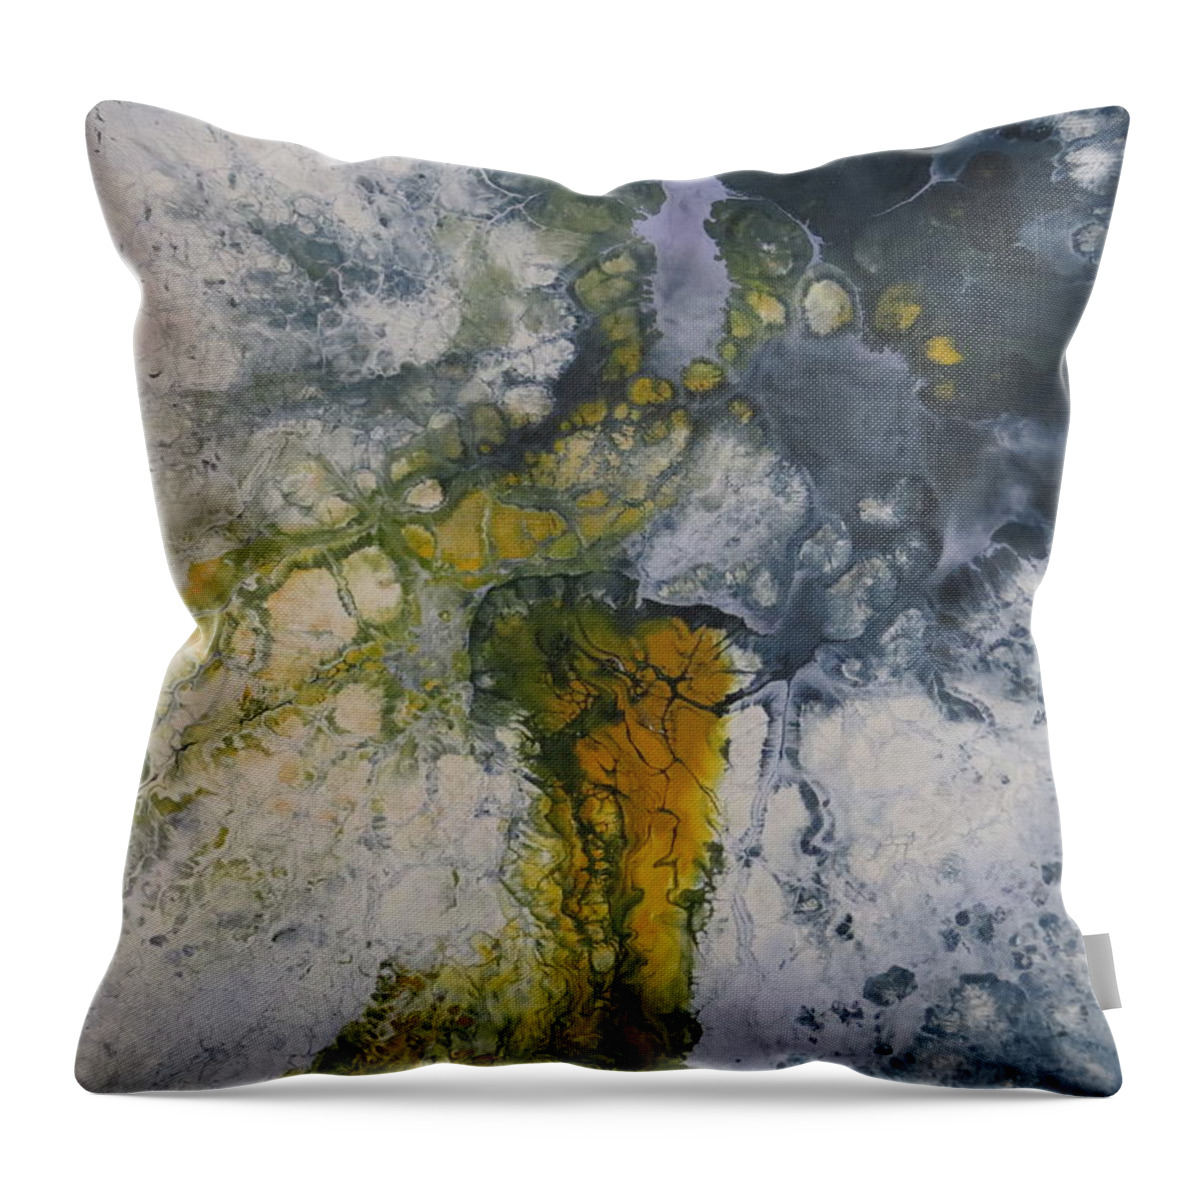 Abstract Throw Pillow featuring the painting Cadence by Soraya Silvestri